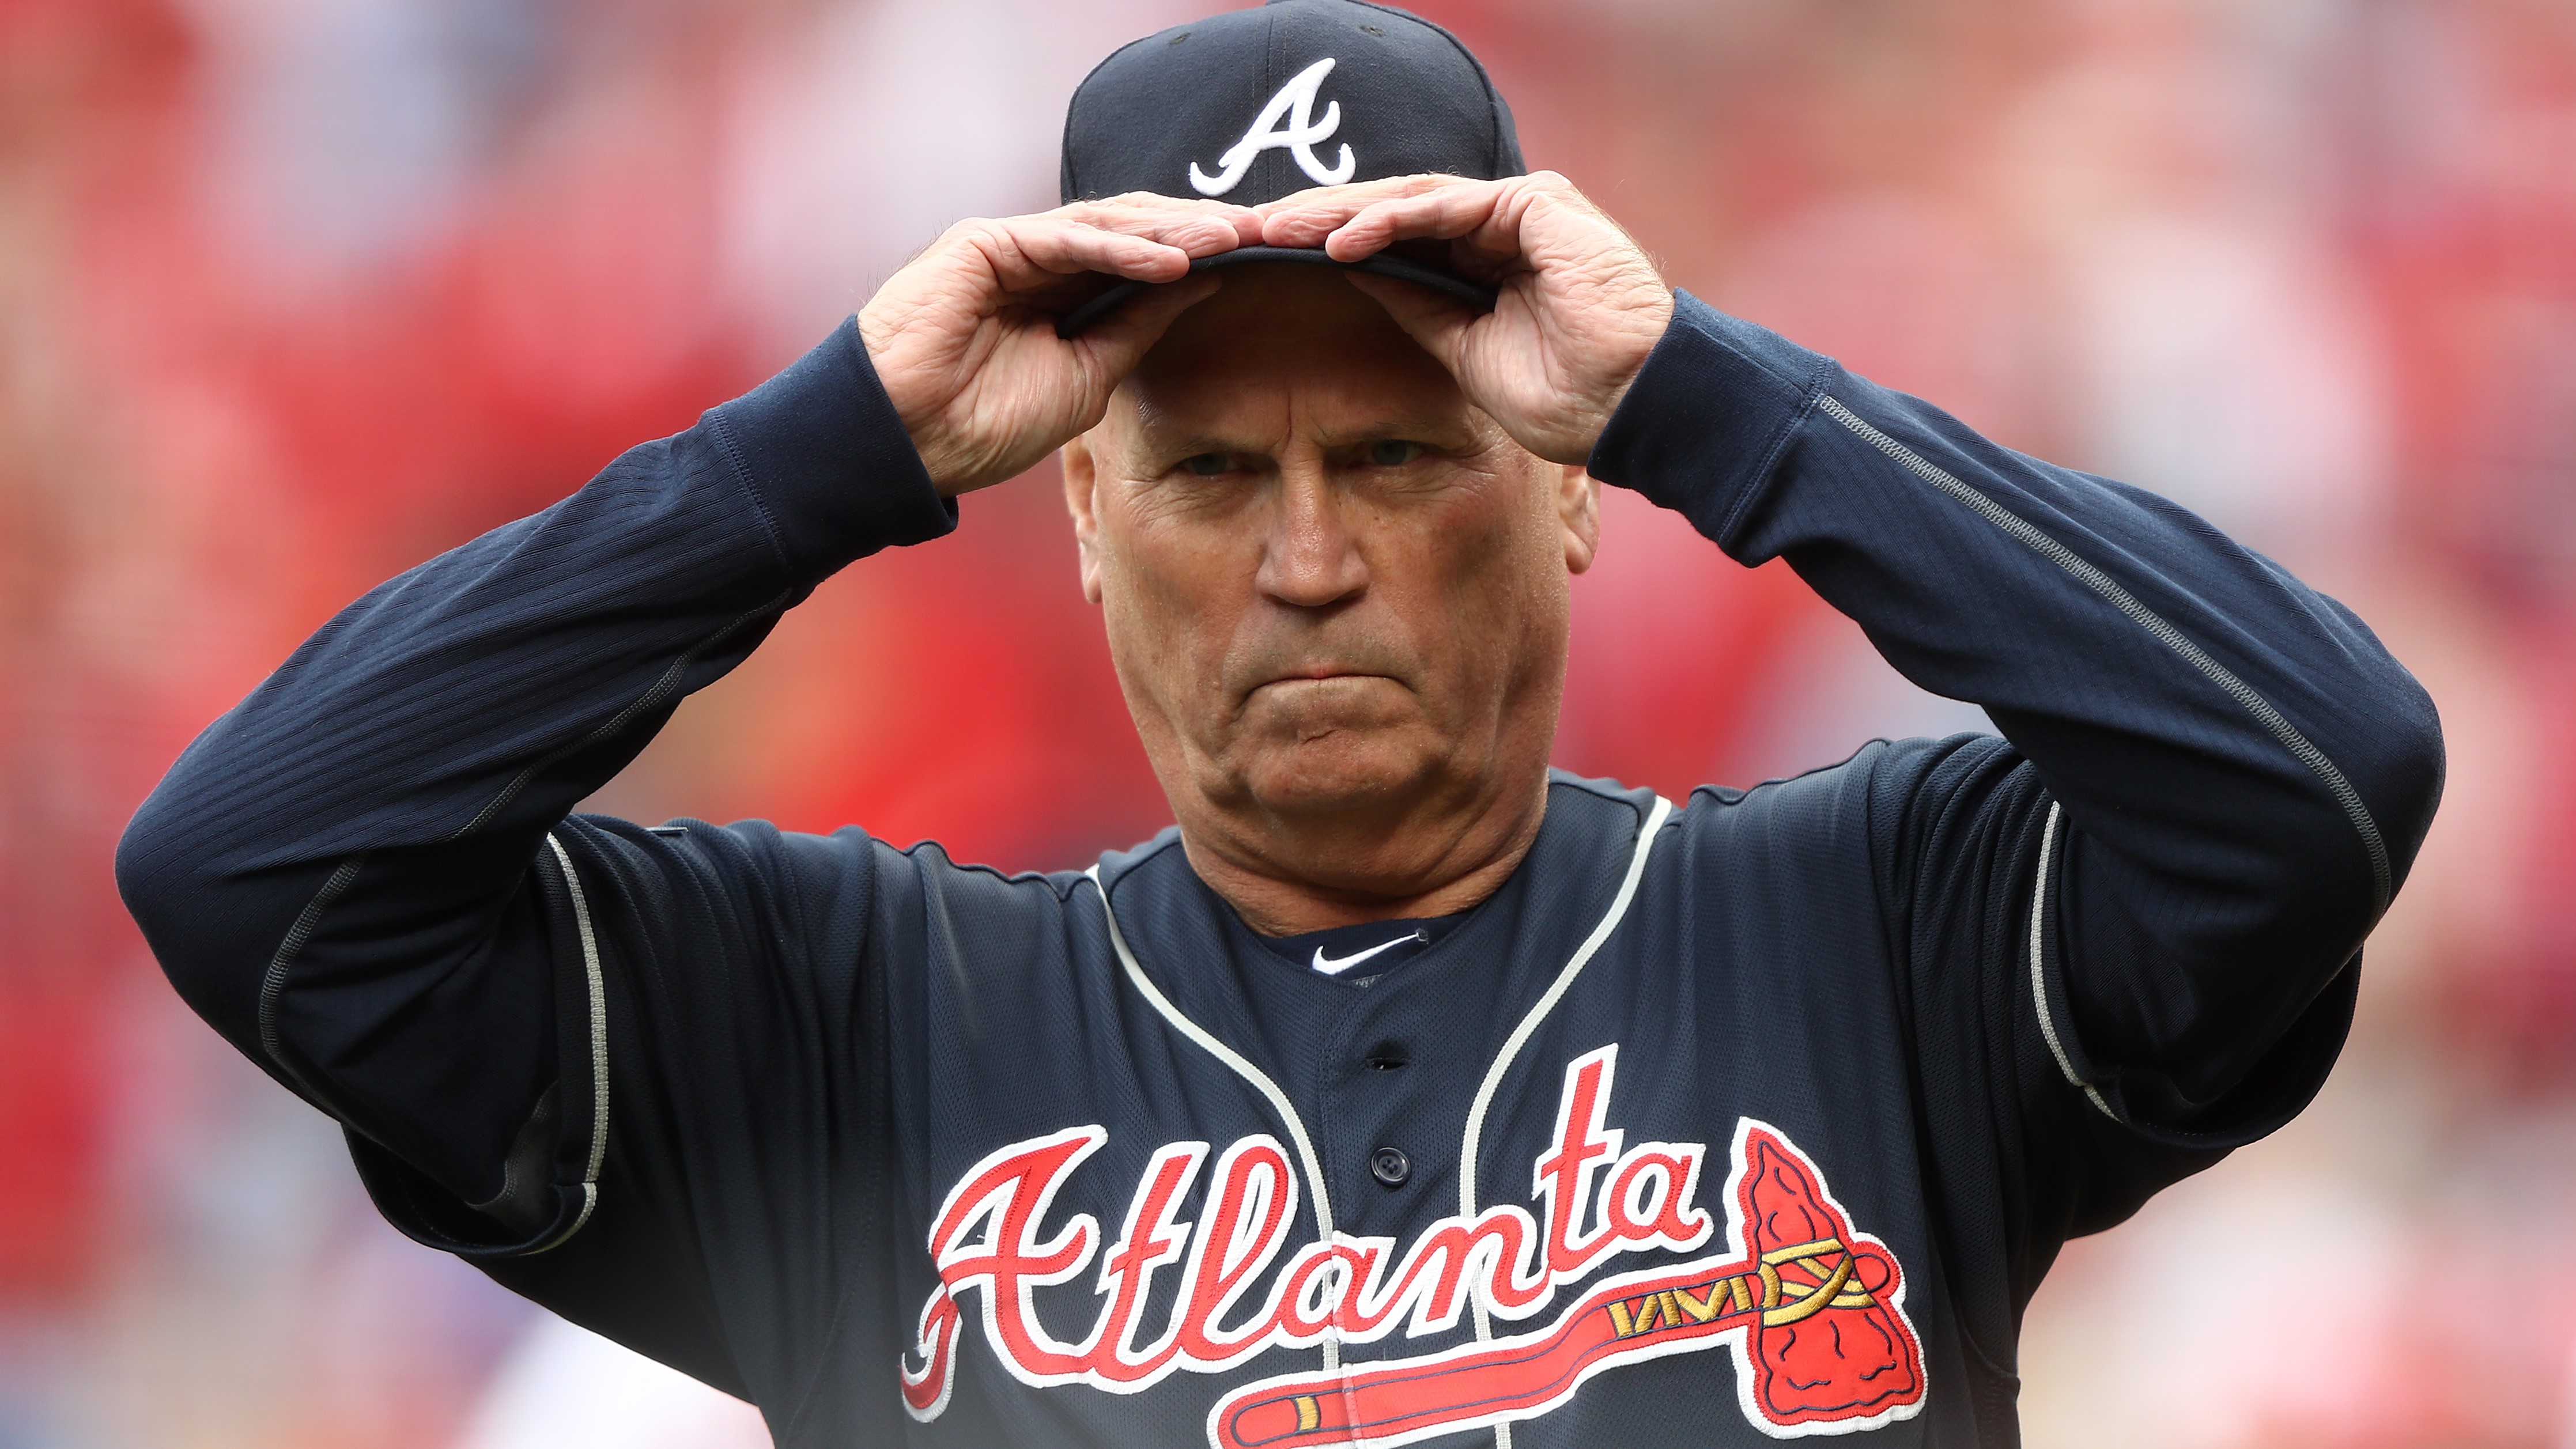 Brian Snitker inks contract extension with the Braves